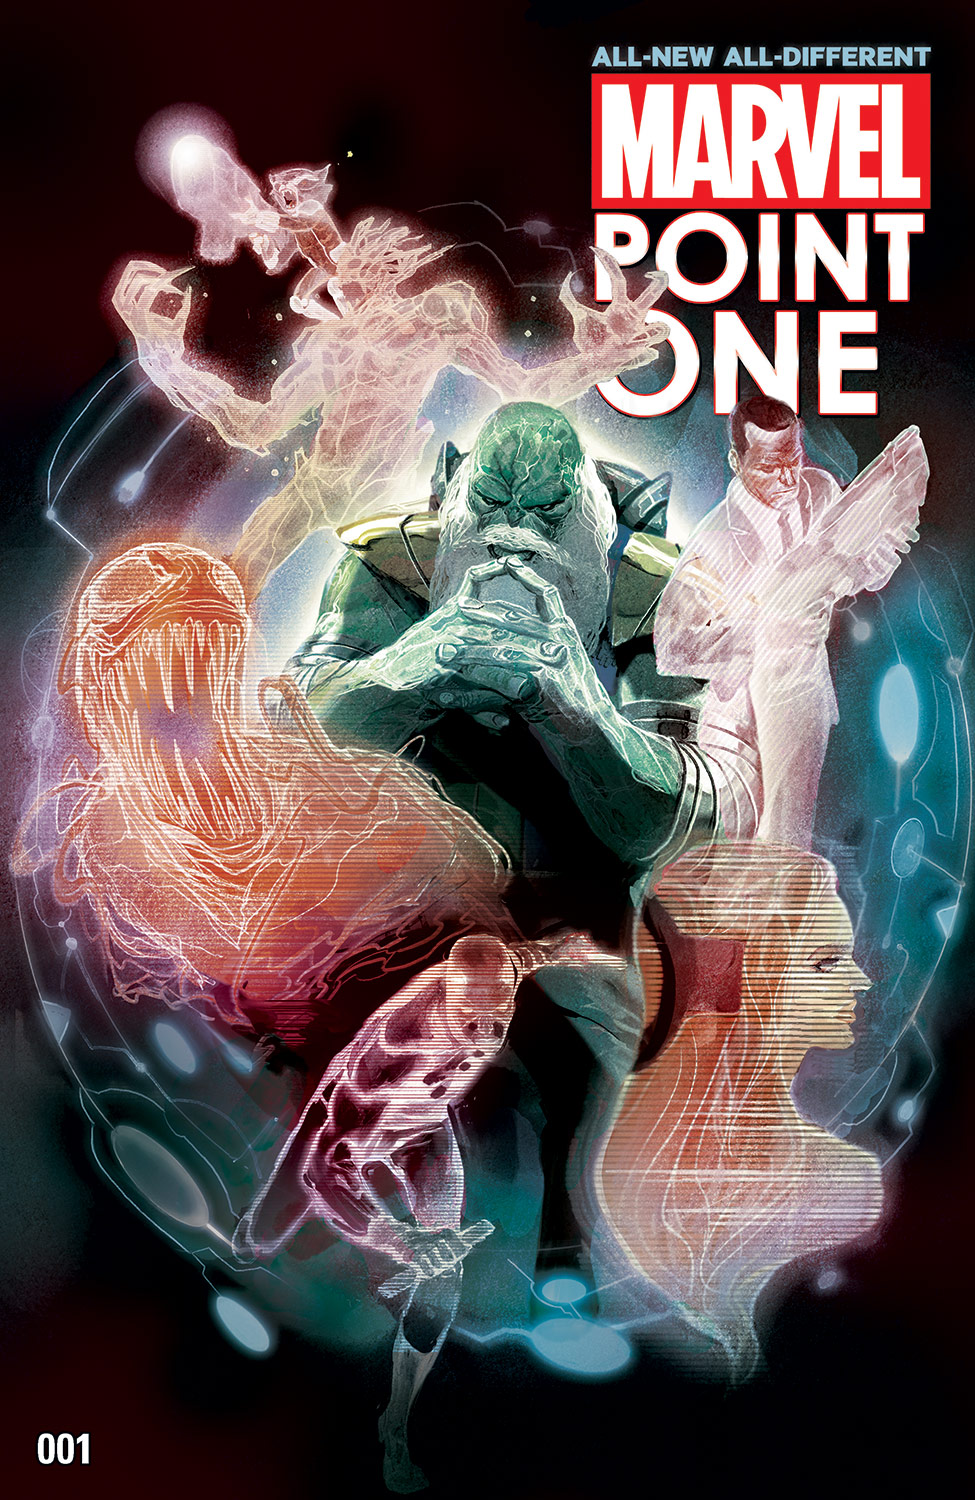 All-New, All-Different Point One (2015) #1